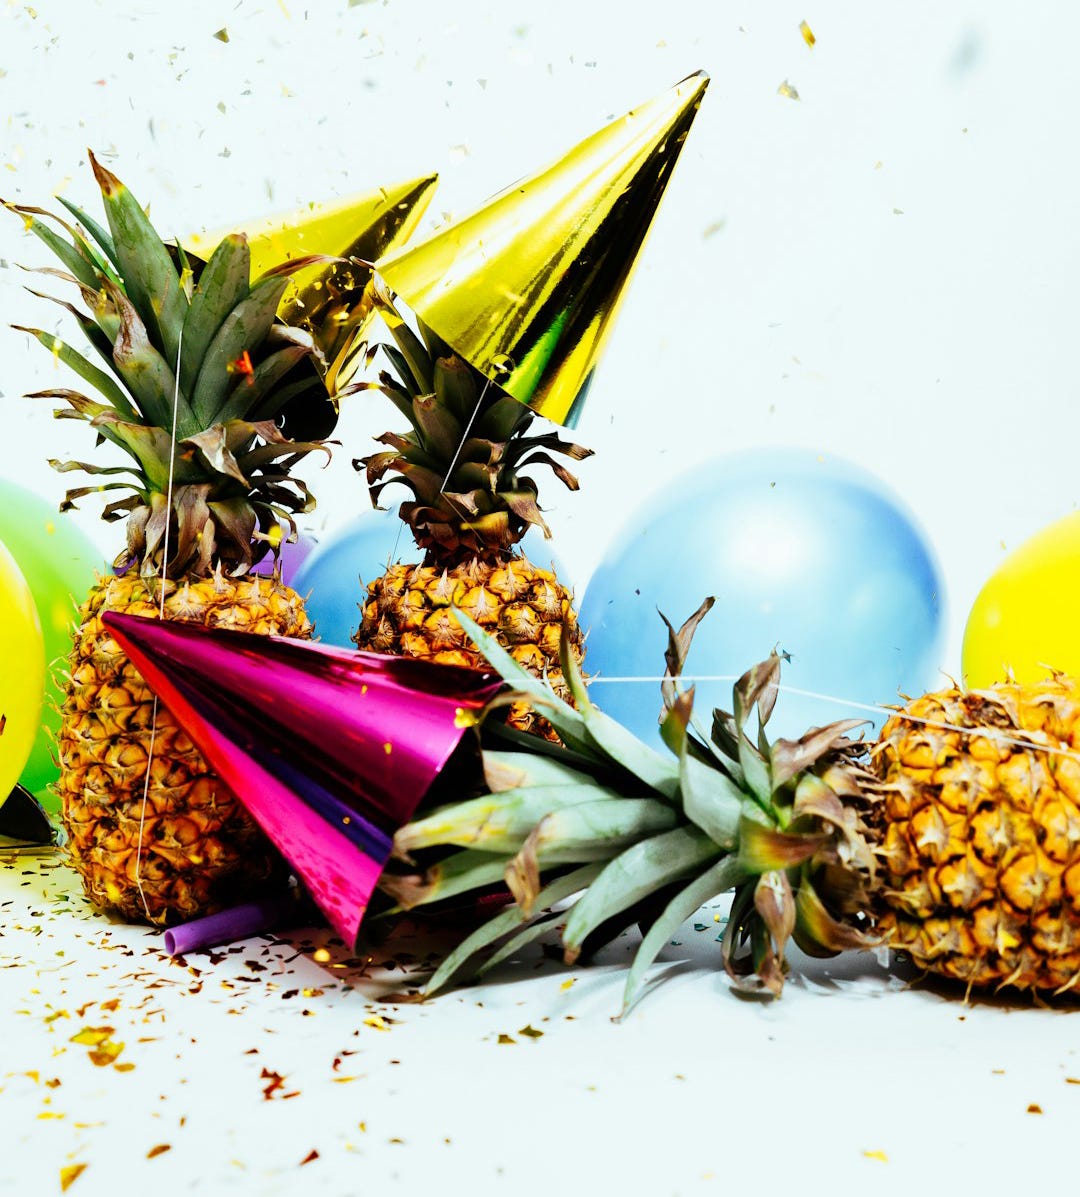 Three pineapples in colorful party hats